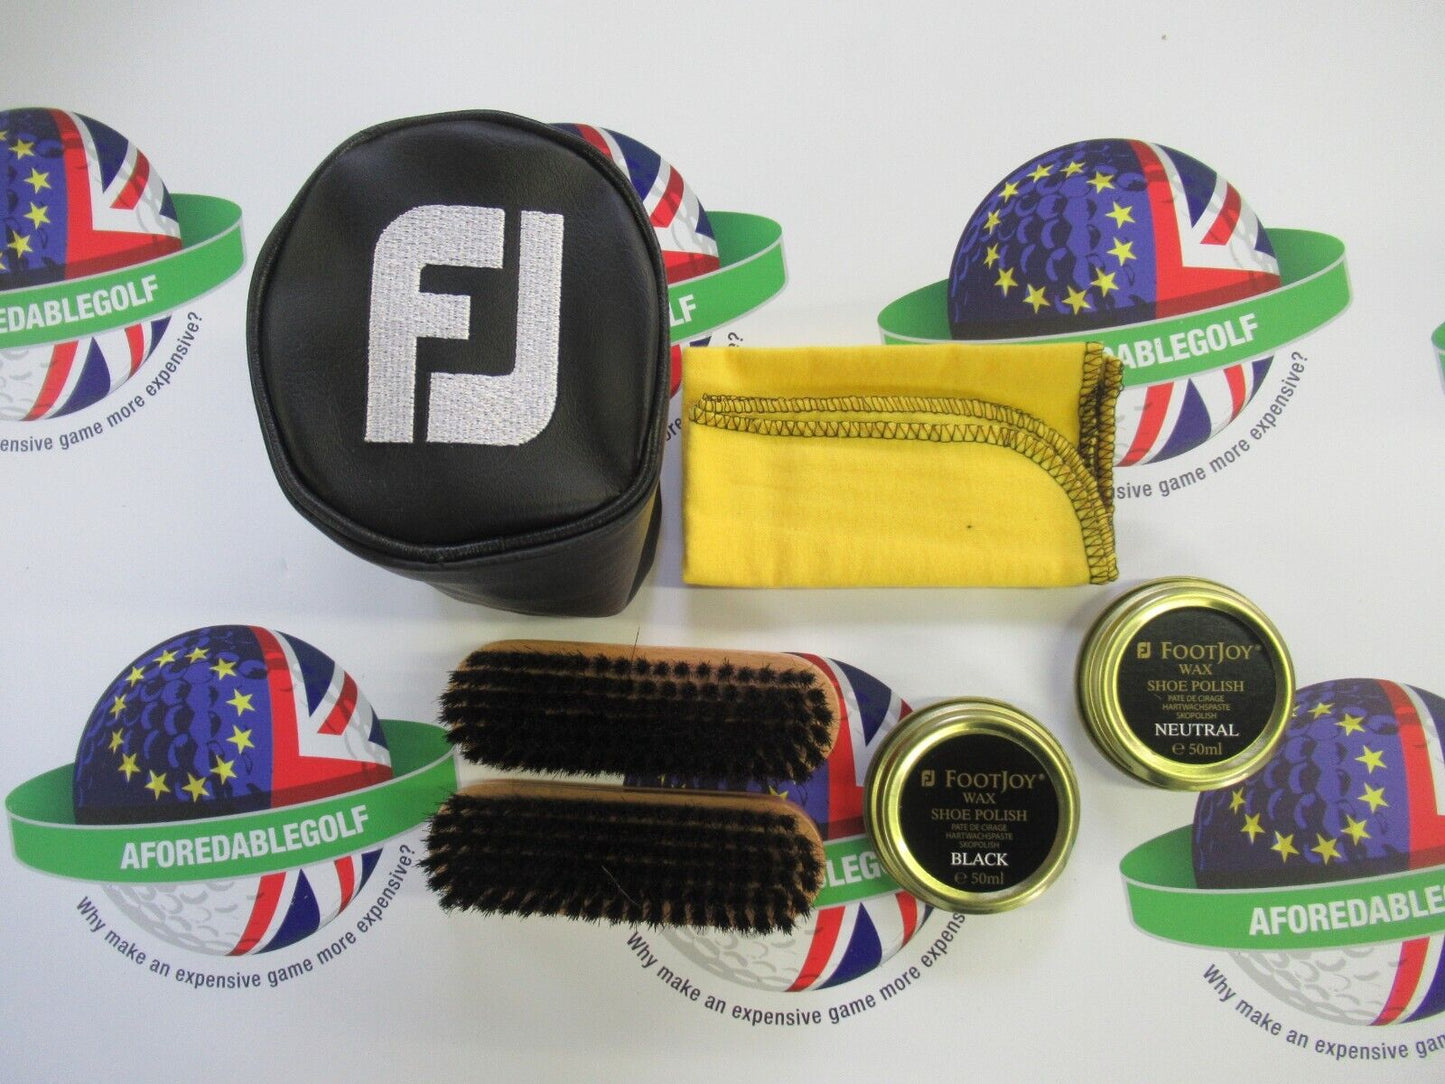 footjoy deluxe shoe care kit brushes, zipper pouch, cloth, black & neutral waxes